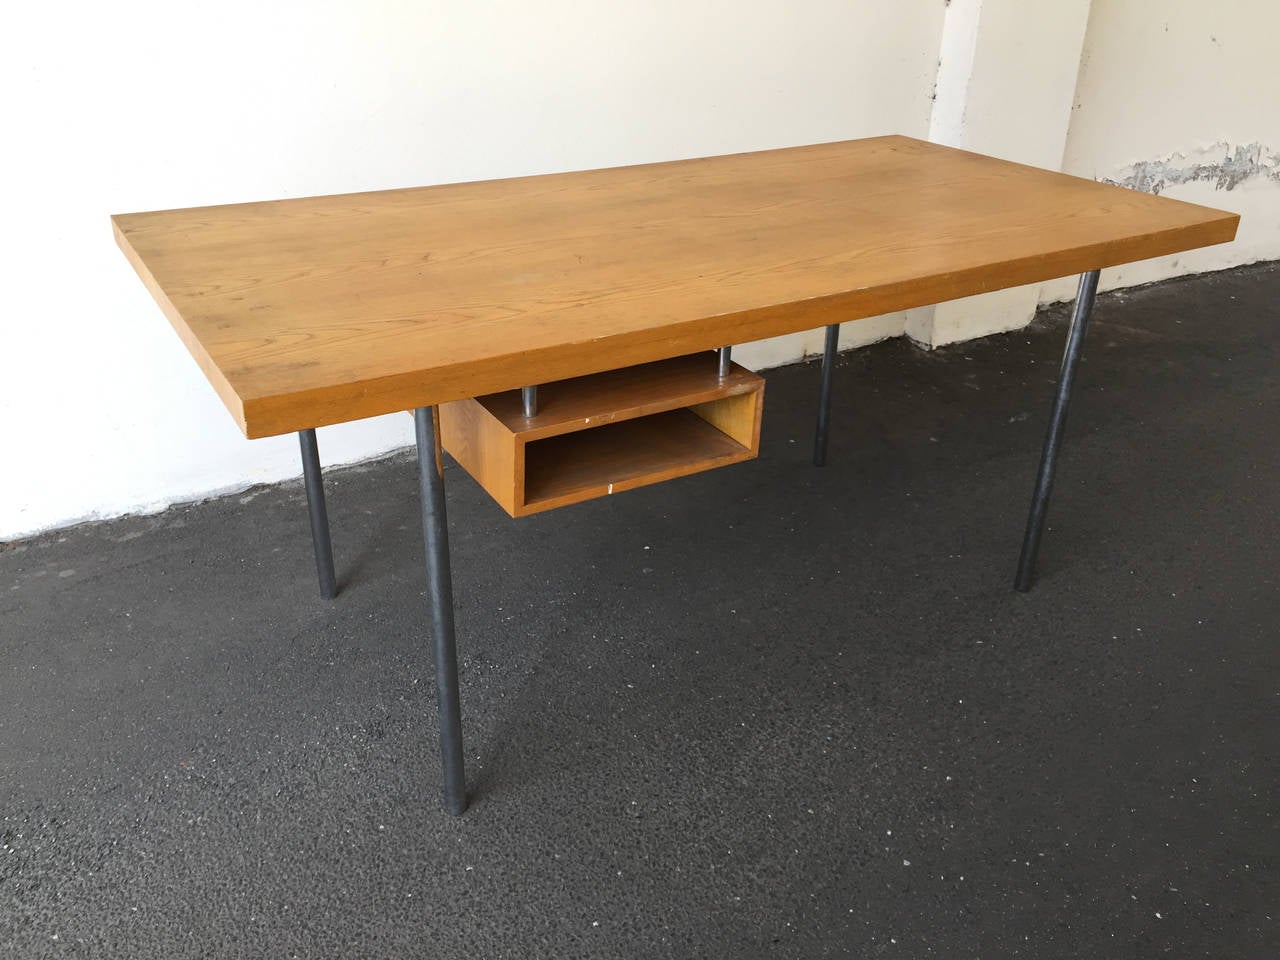 Mid-Century Modern Architects Desk with Hidden Lockable Drawer, Style of Poul Kjaerholm For Sale